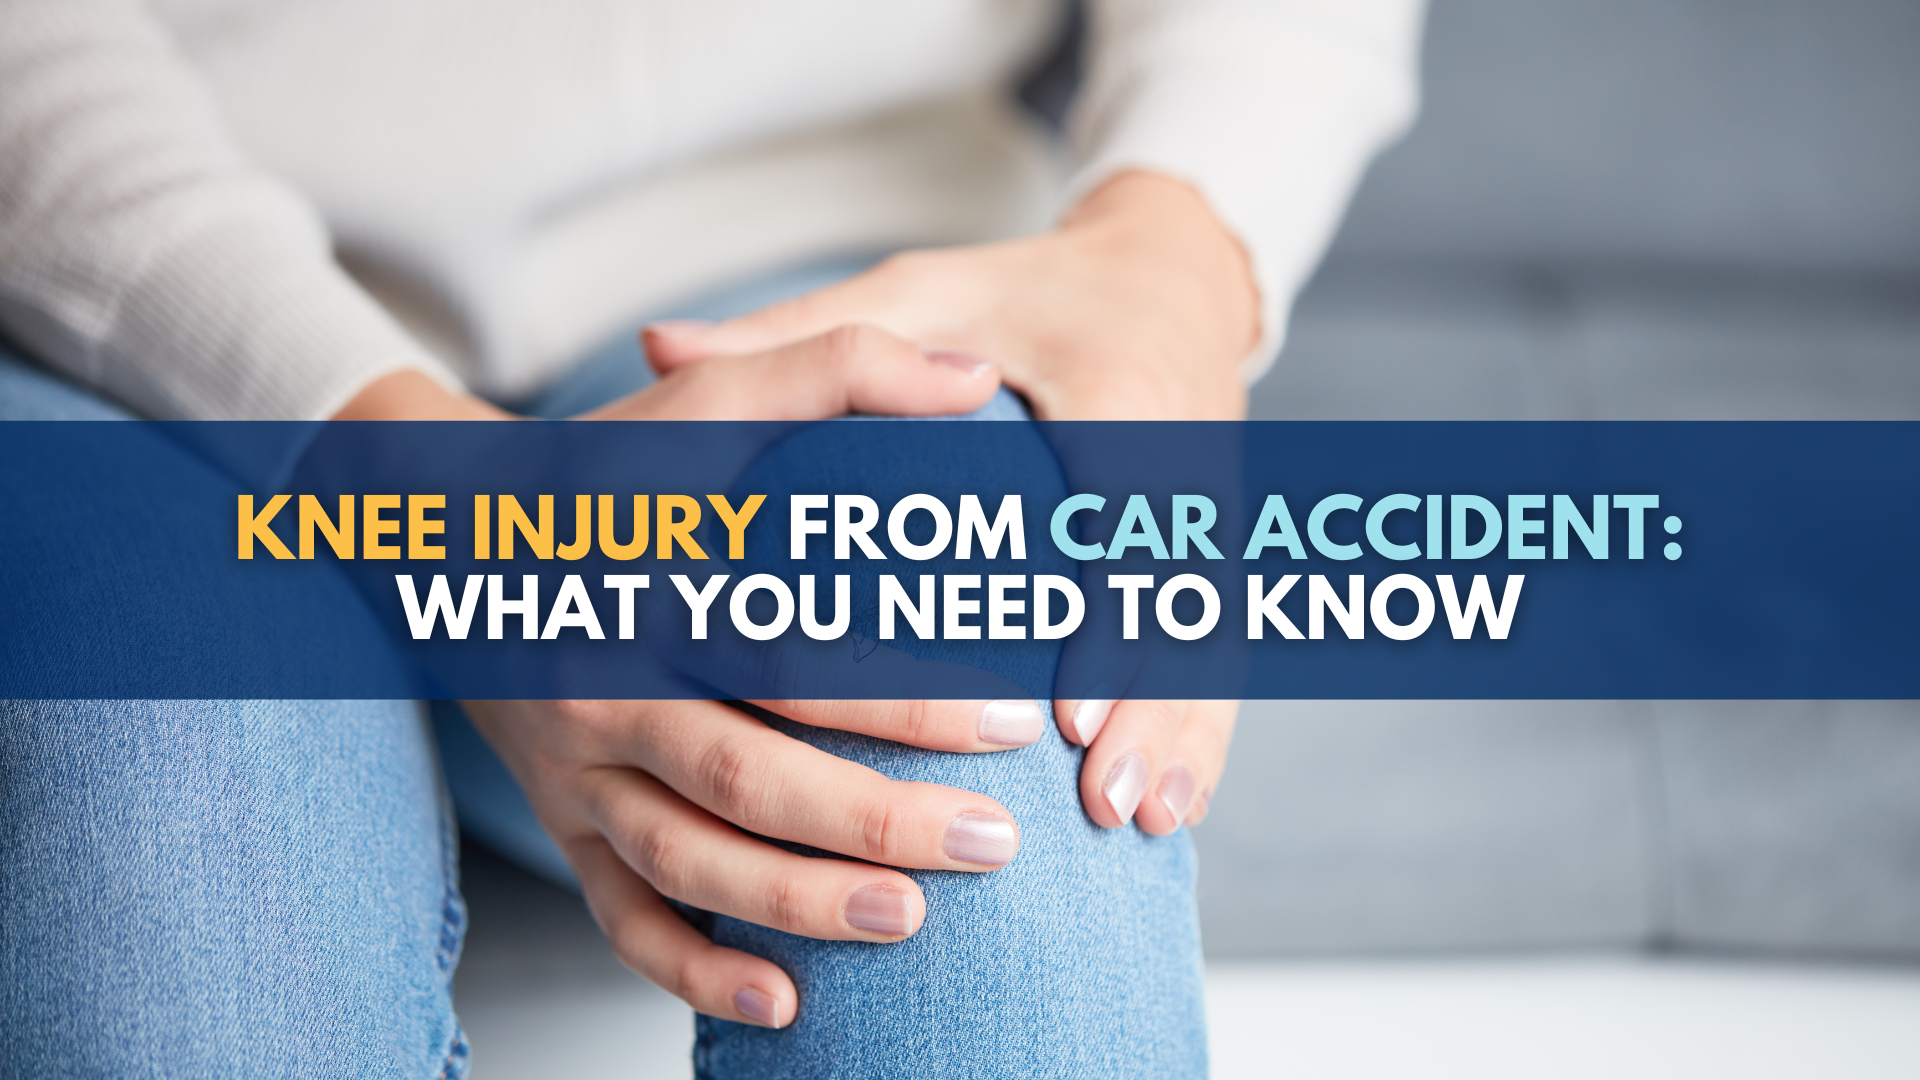 What To Do With A Knee Injury From A Car Accident - Stridewell